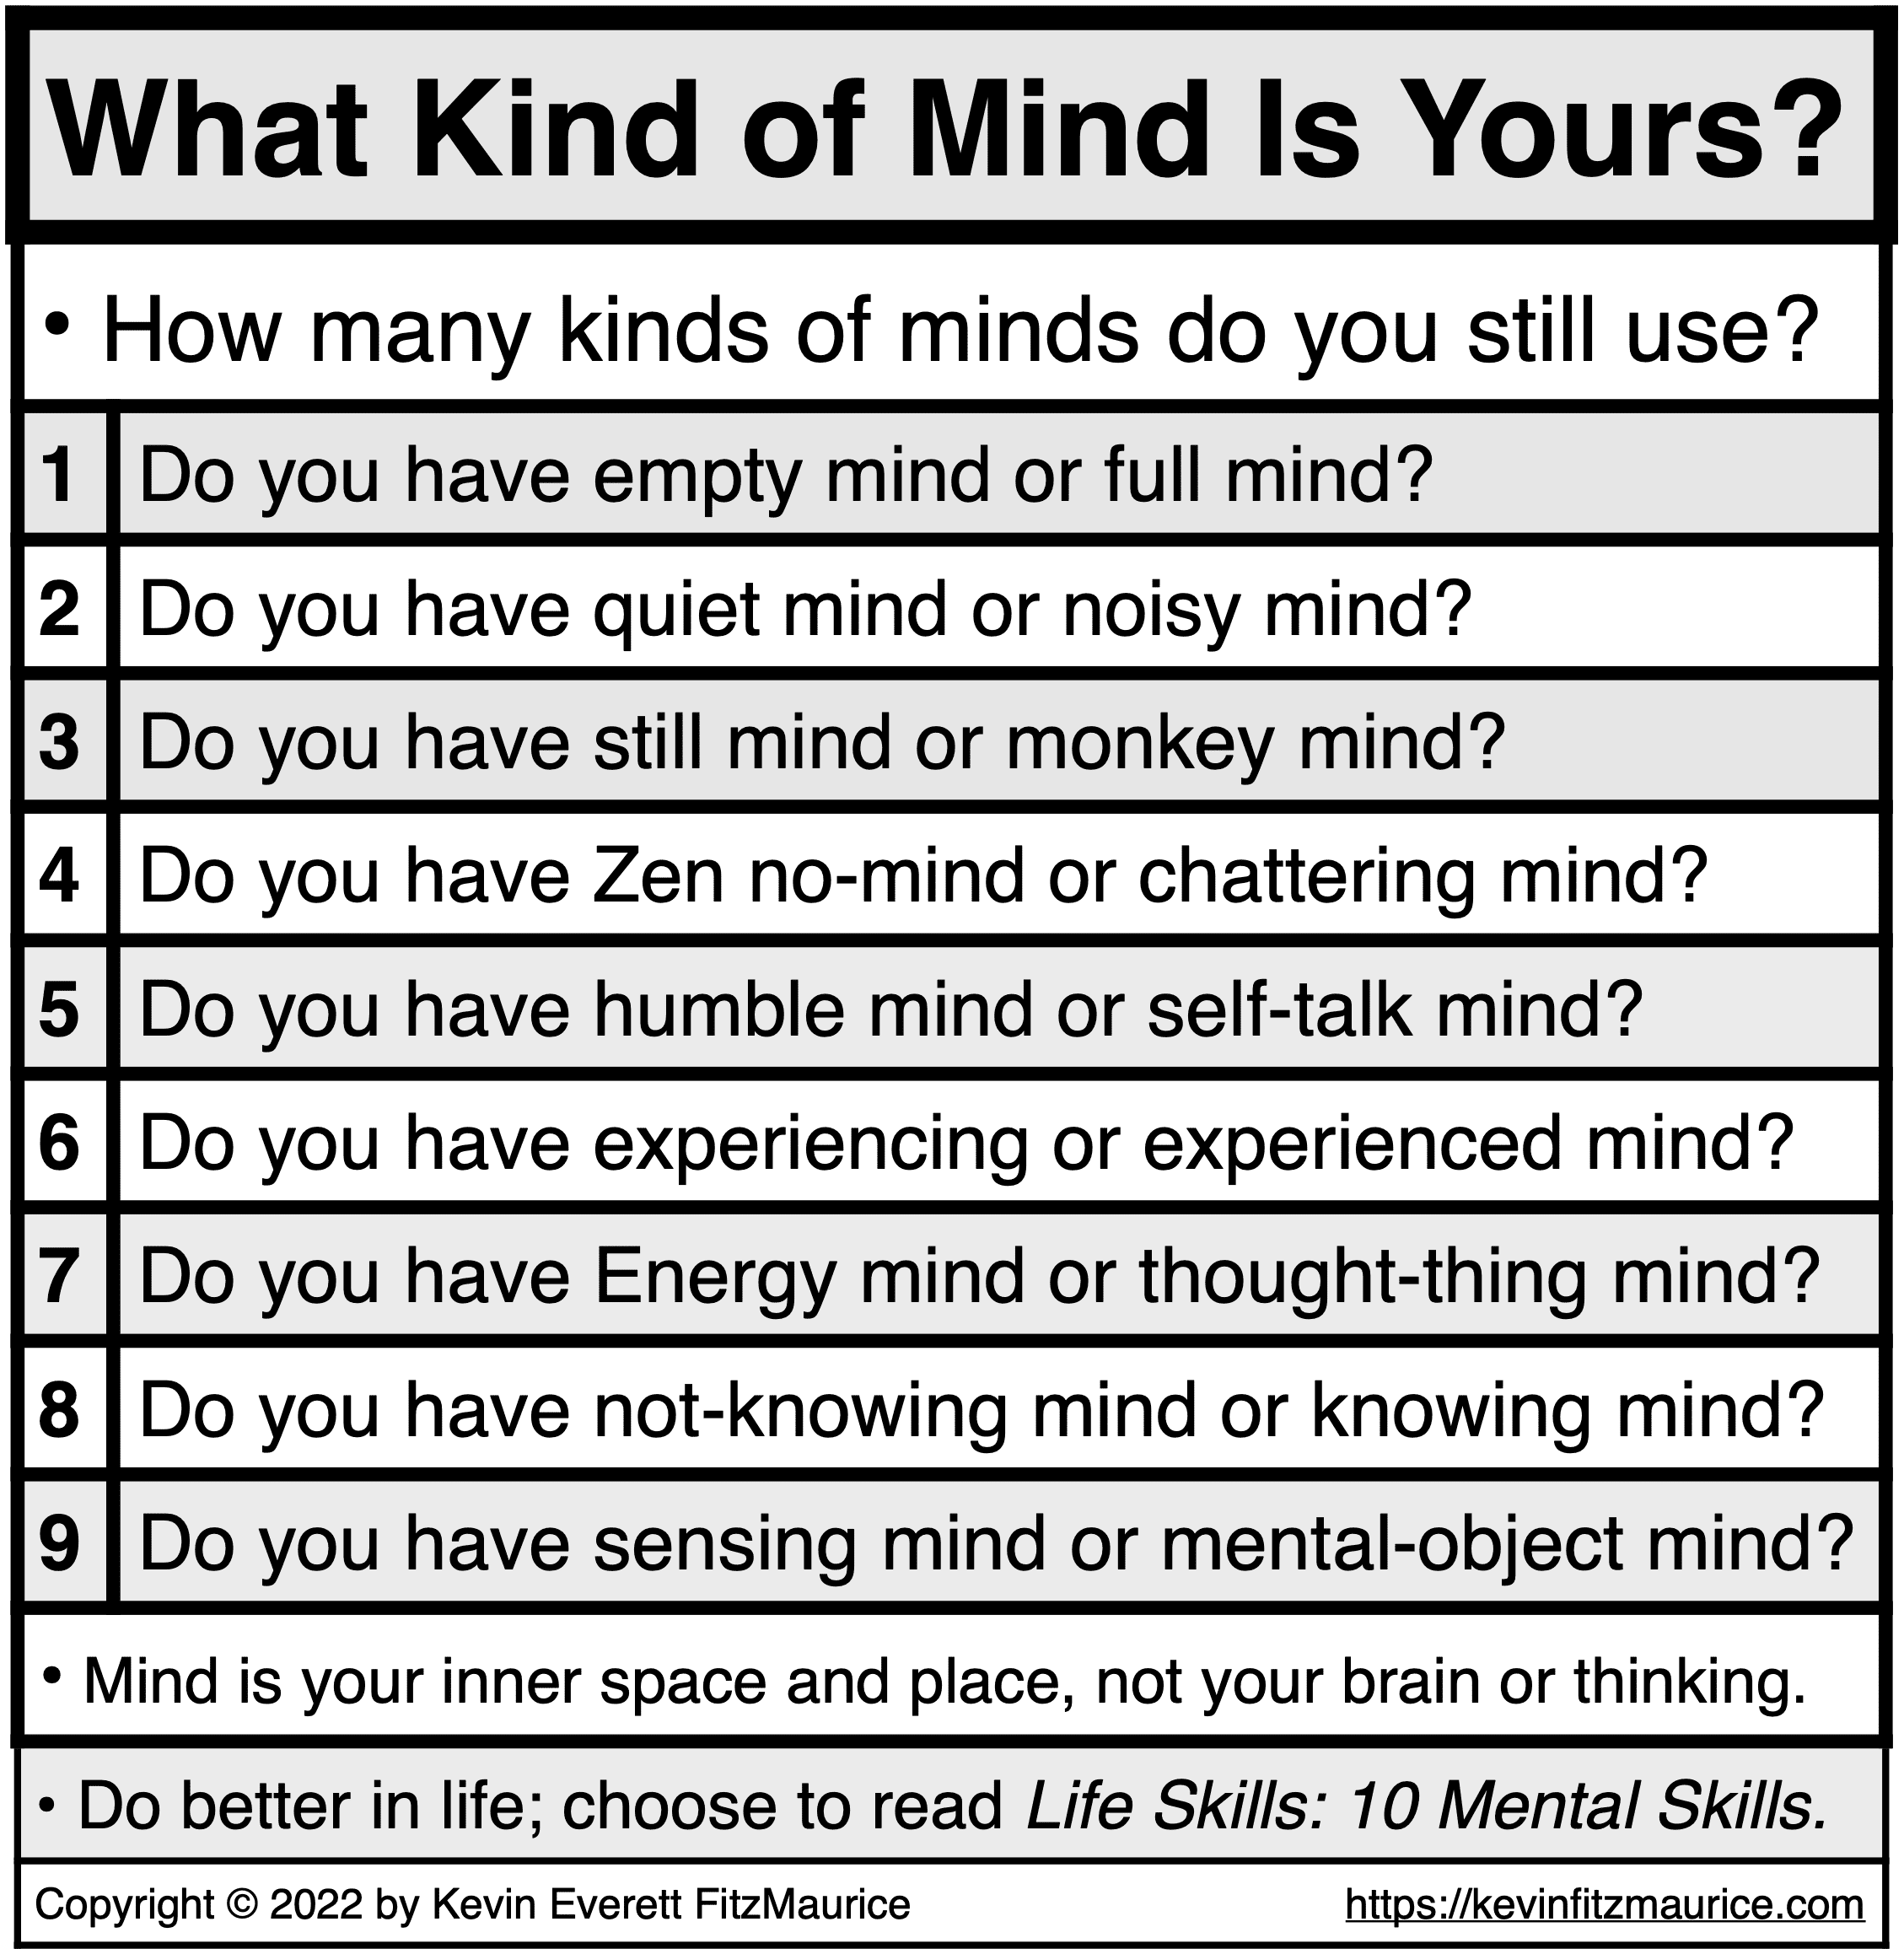 Know your own mind.